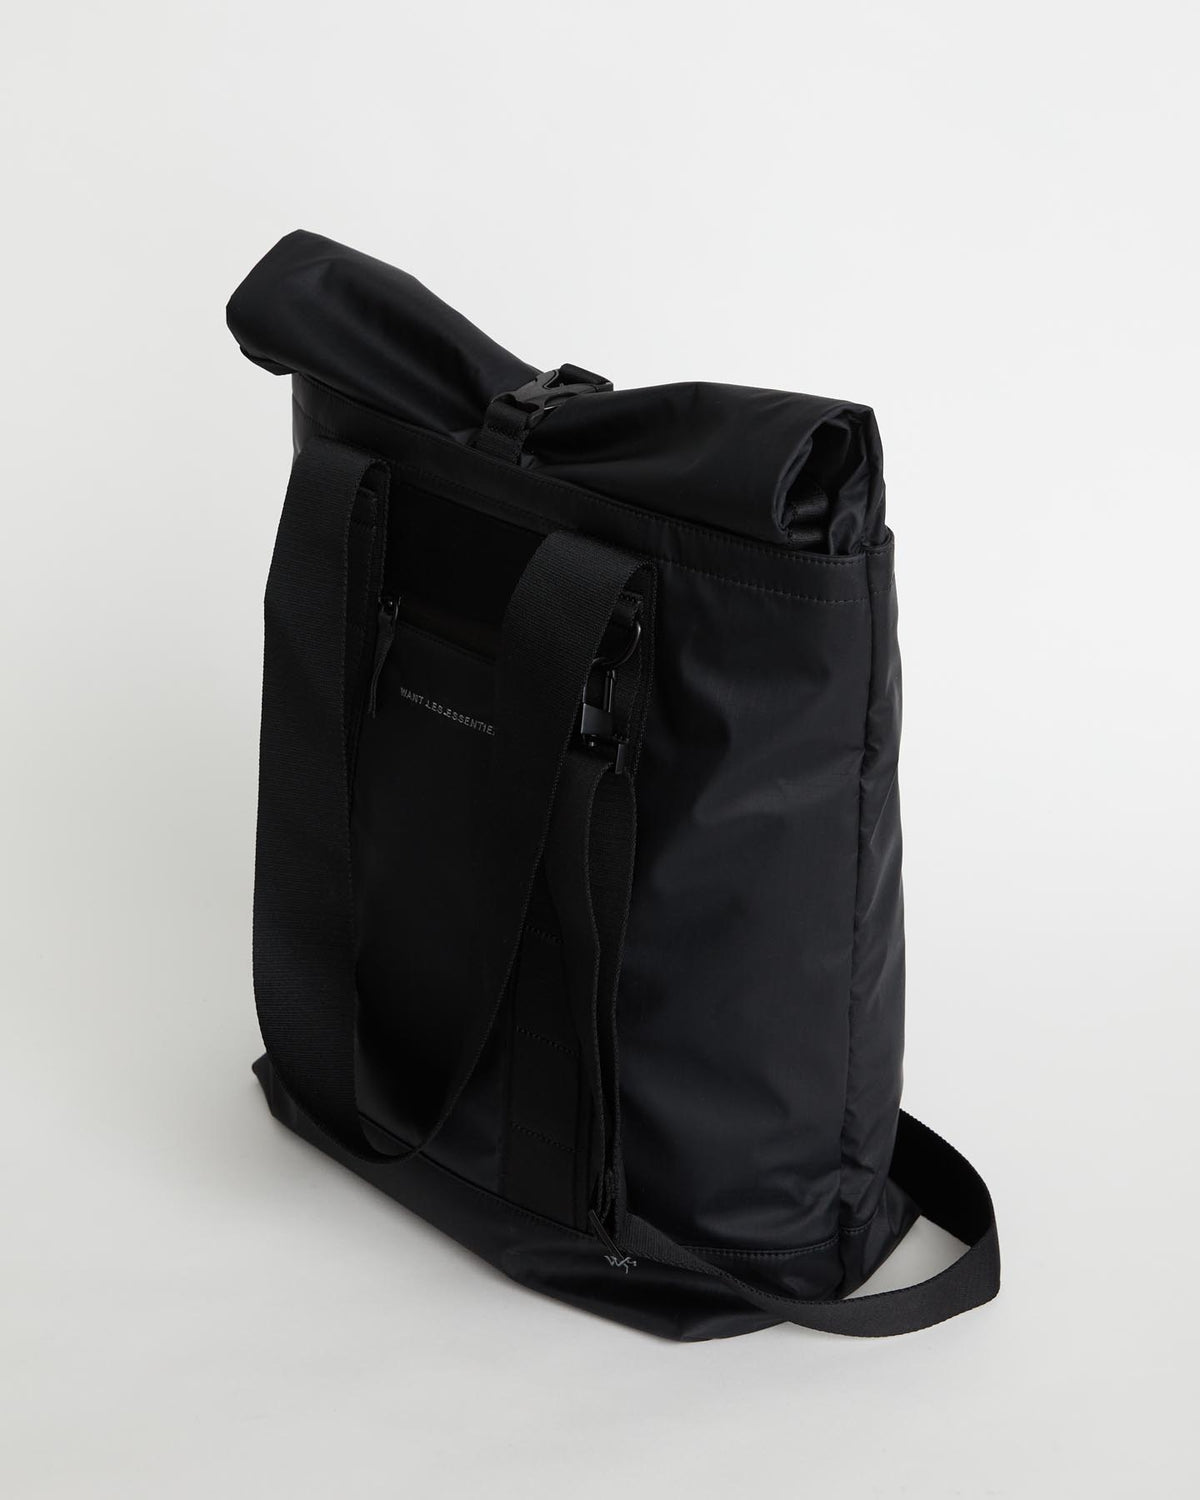 Havel Utility Tote